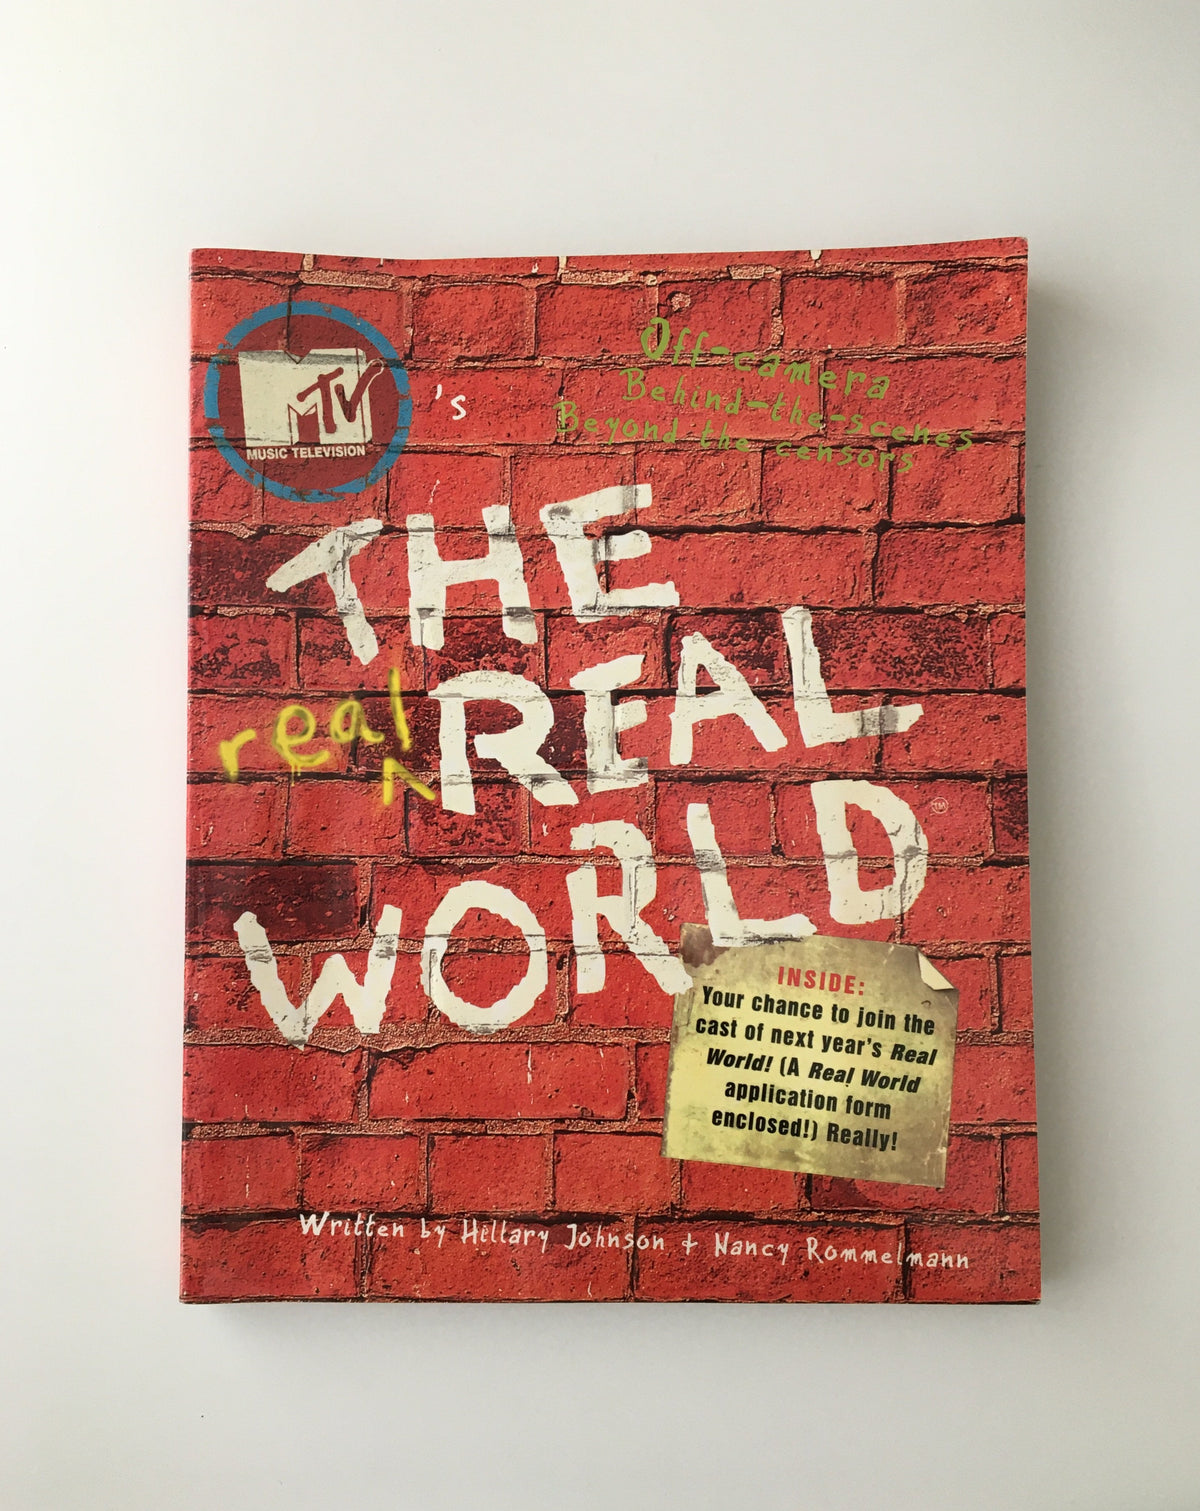 The Real Real World by Hillary Johnson and Nancy Rommelmann